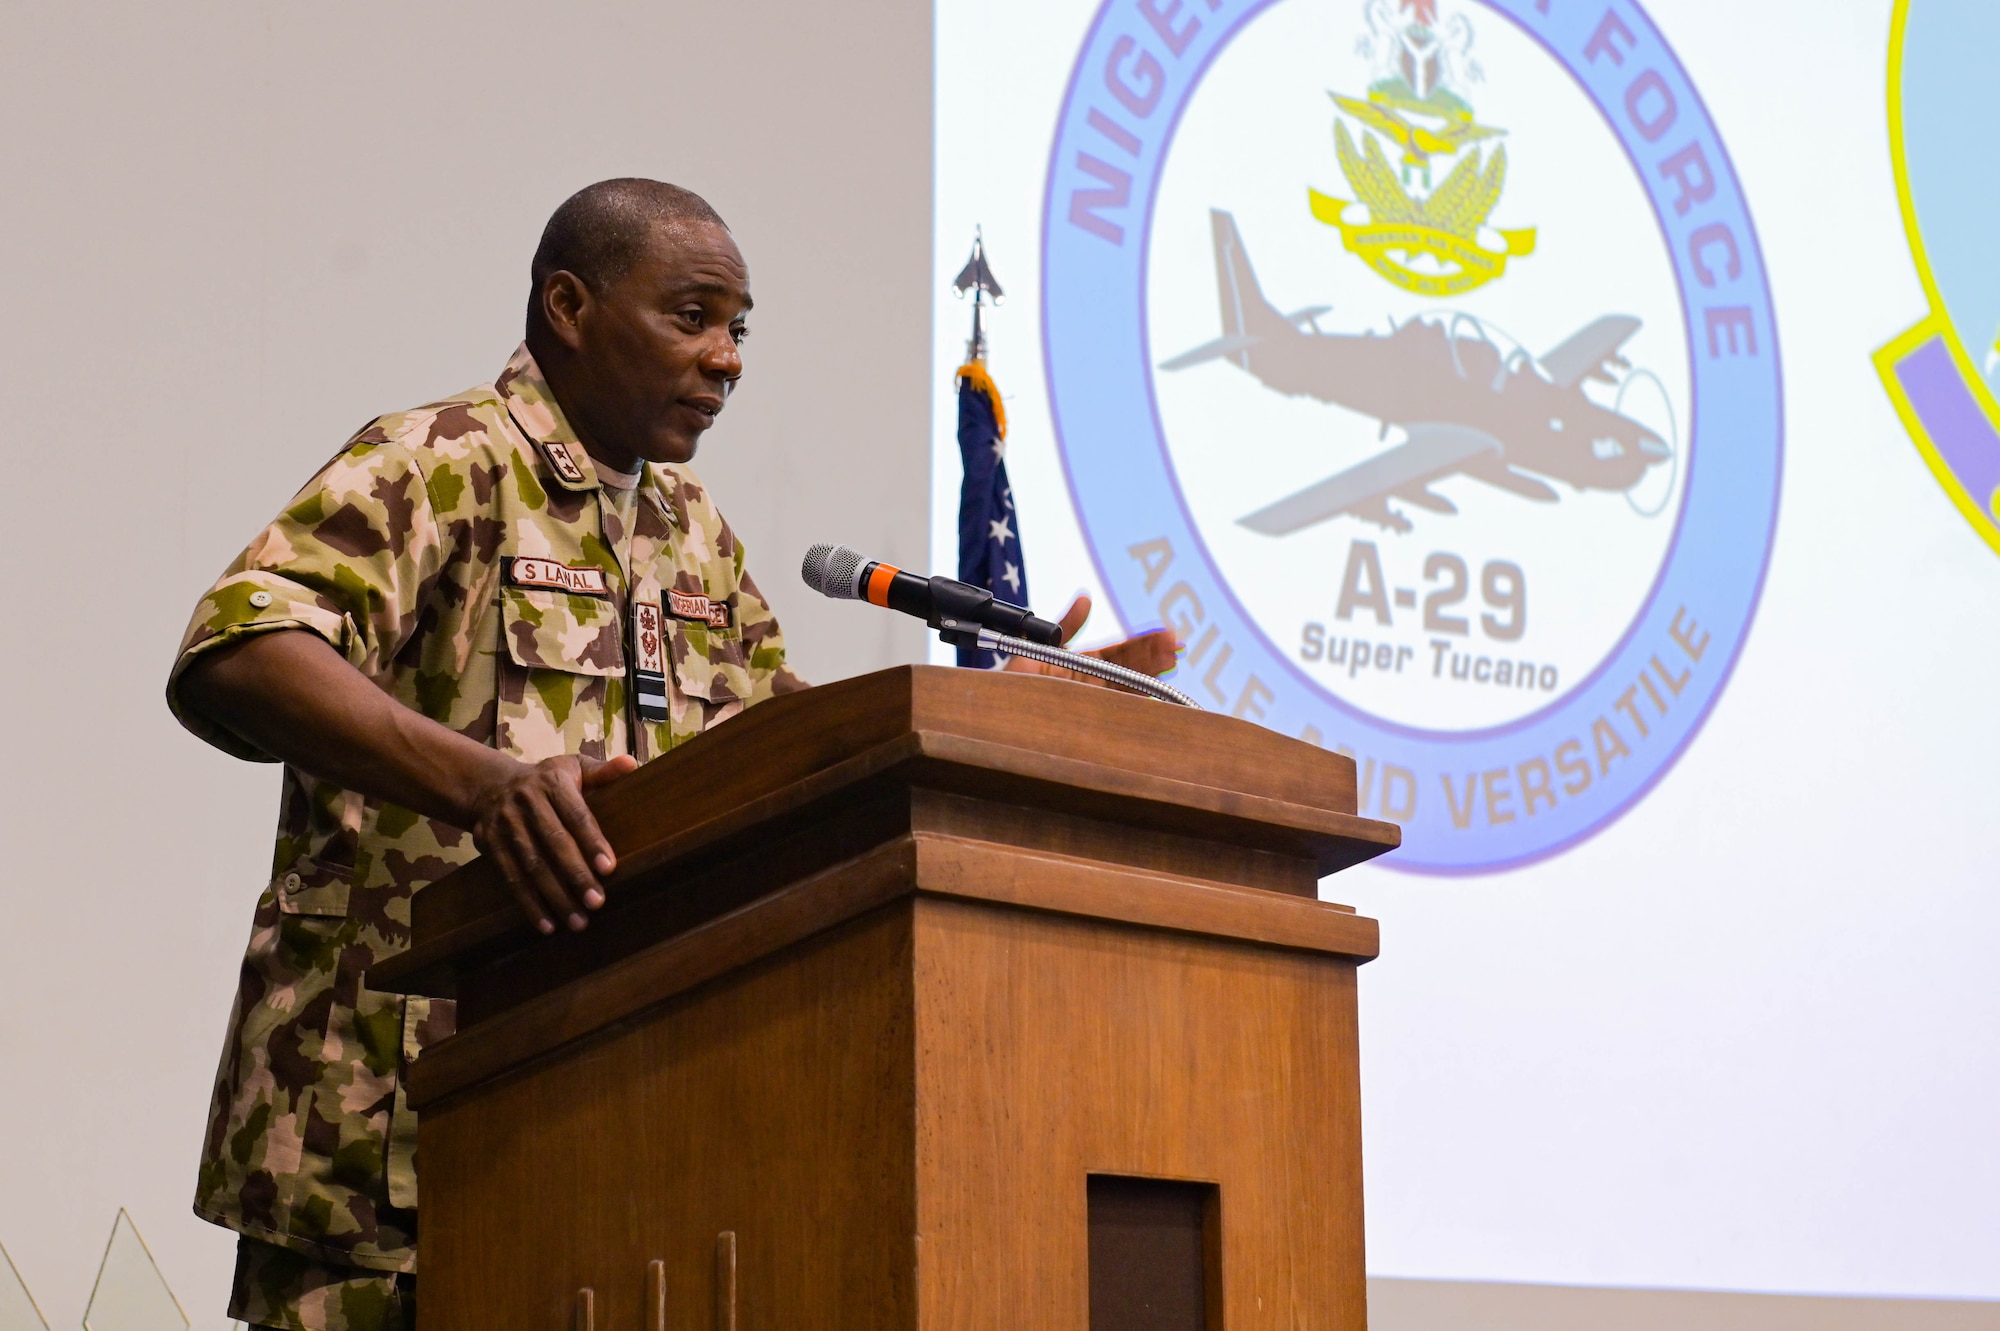 Nigerian Air Force Air Vice Marshal Sule Lawal, Nigerian A-29 program lead foreign liaison officer, gives a speech during the NAF A-29 pilot graduation ceremony at Moody Air Force Base, Georgia, Sept. 2, 2021. Each pilot has accomplished more than 70 hours of formal academics, 65 hours of simulators, and between 50-100 hours of flying, depending on their specific track. (U.S. Air Force photo by Senior Airman Rebeckah Medeiros)